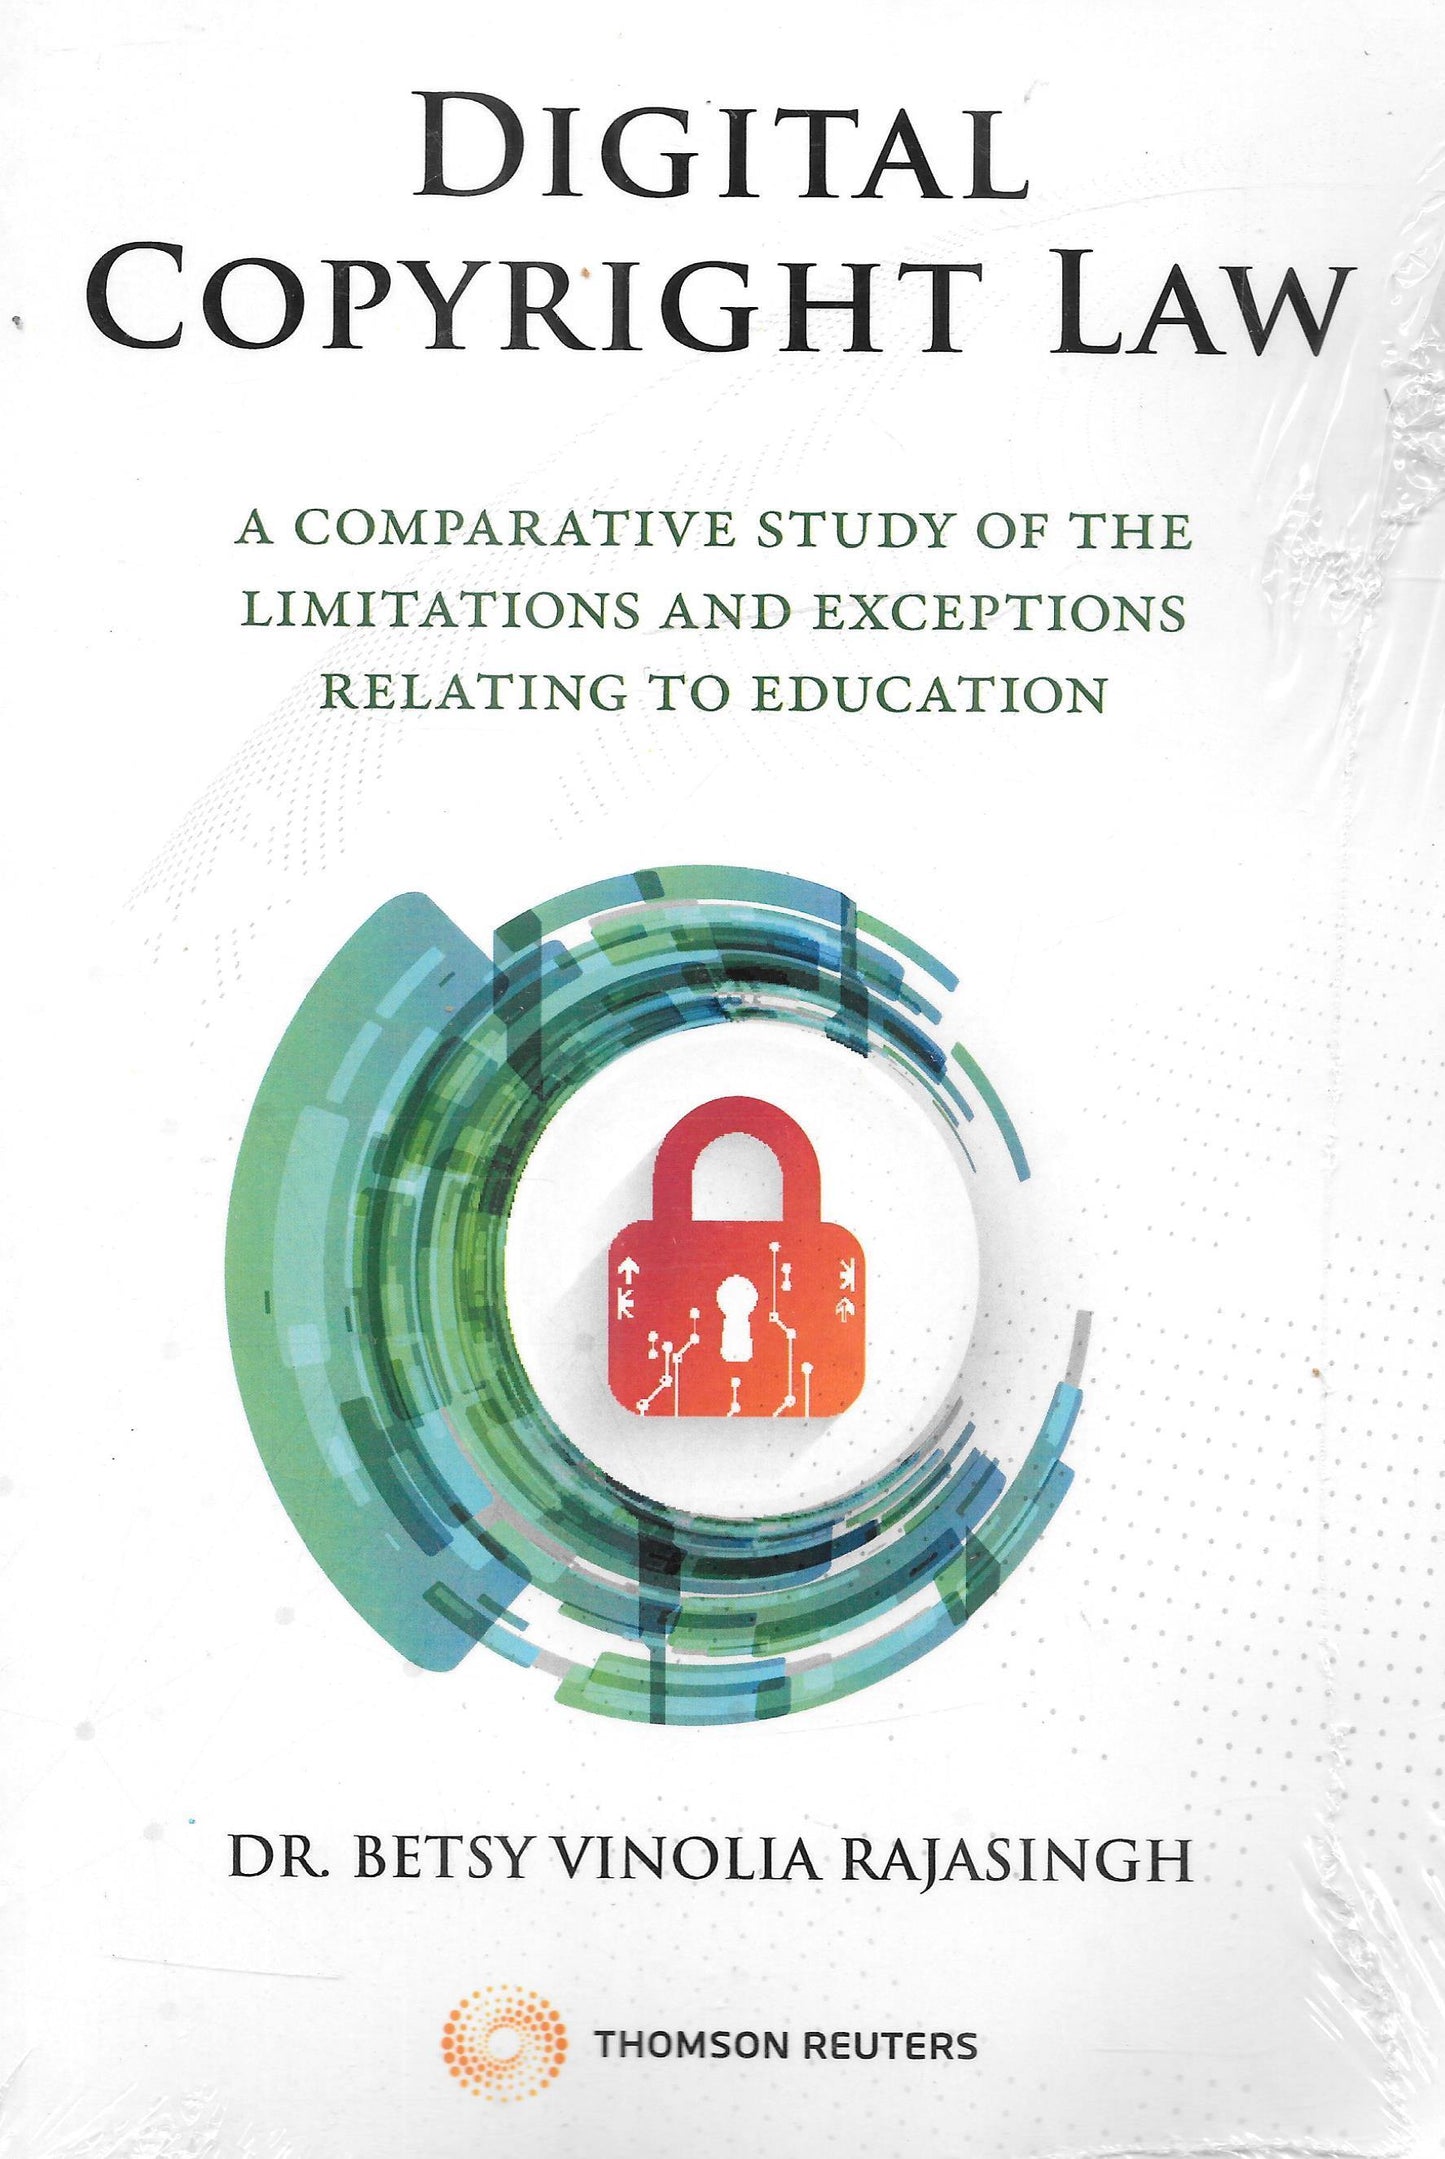 Digital Copyright Law - A Comparative Study of the Limitations and Exceptions Relating to Education